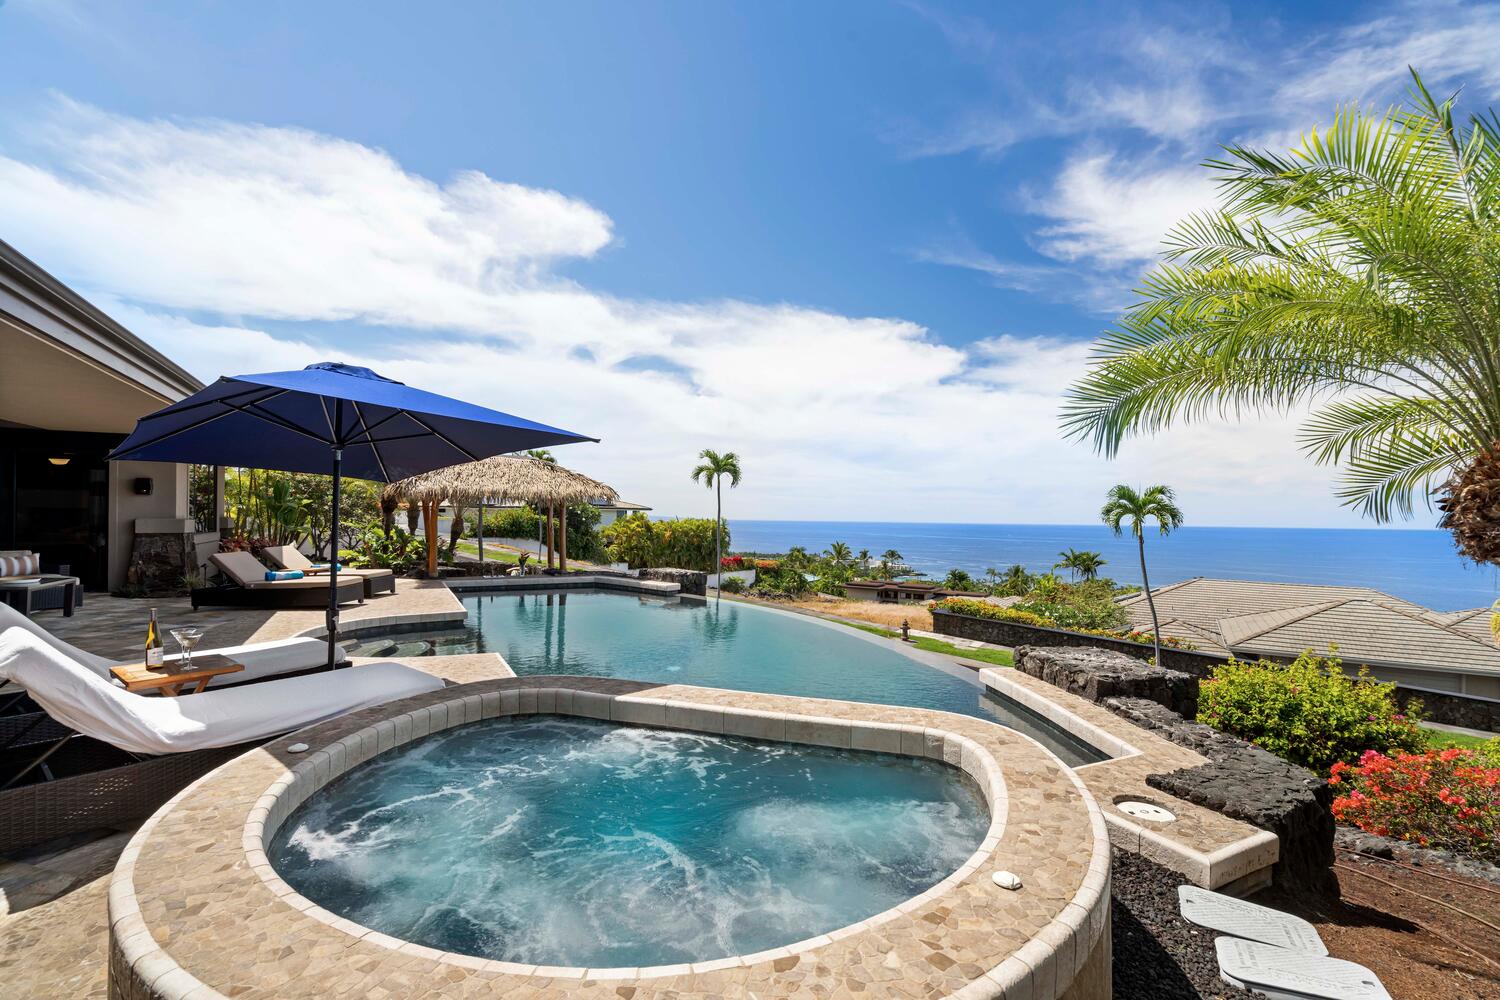 Kailua Kona Vacation Rentals, Island Oasis - Take a dip in the hot tub as the stress melts away!